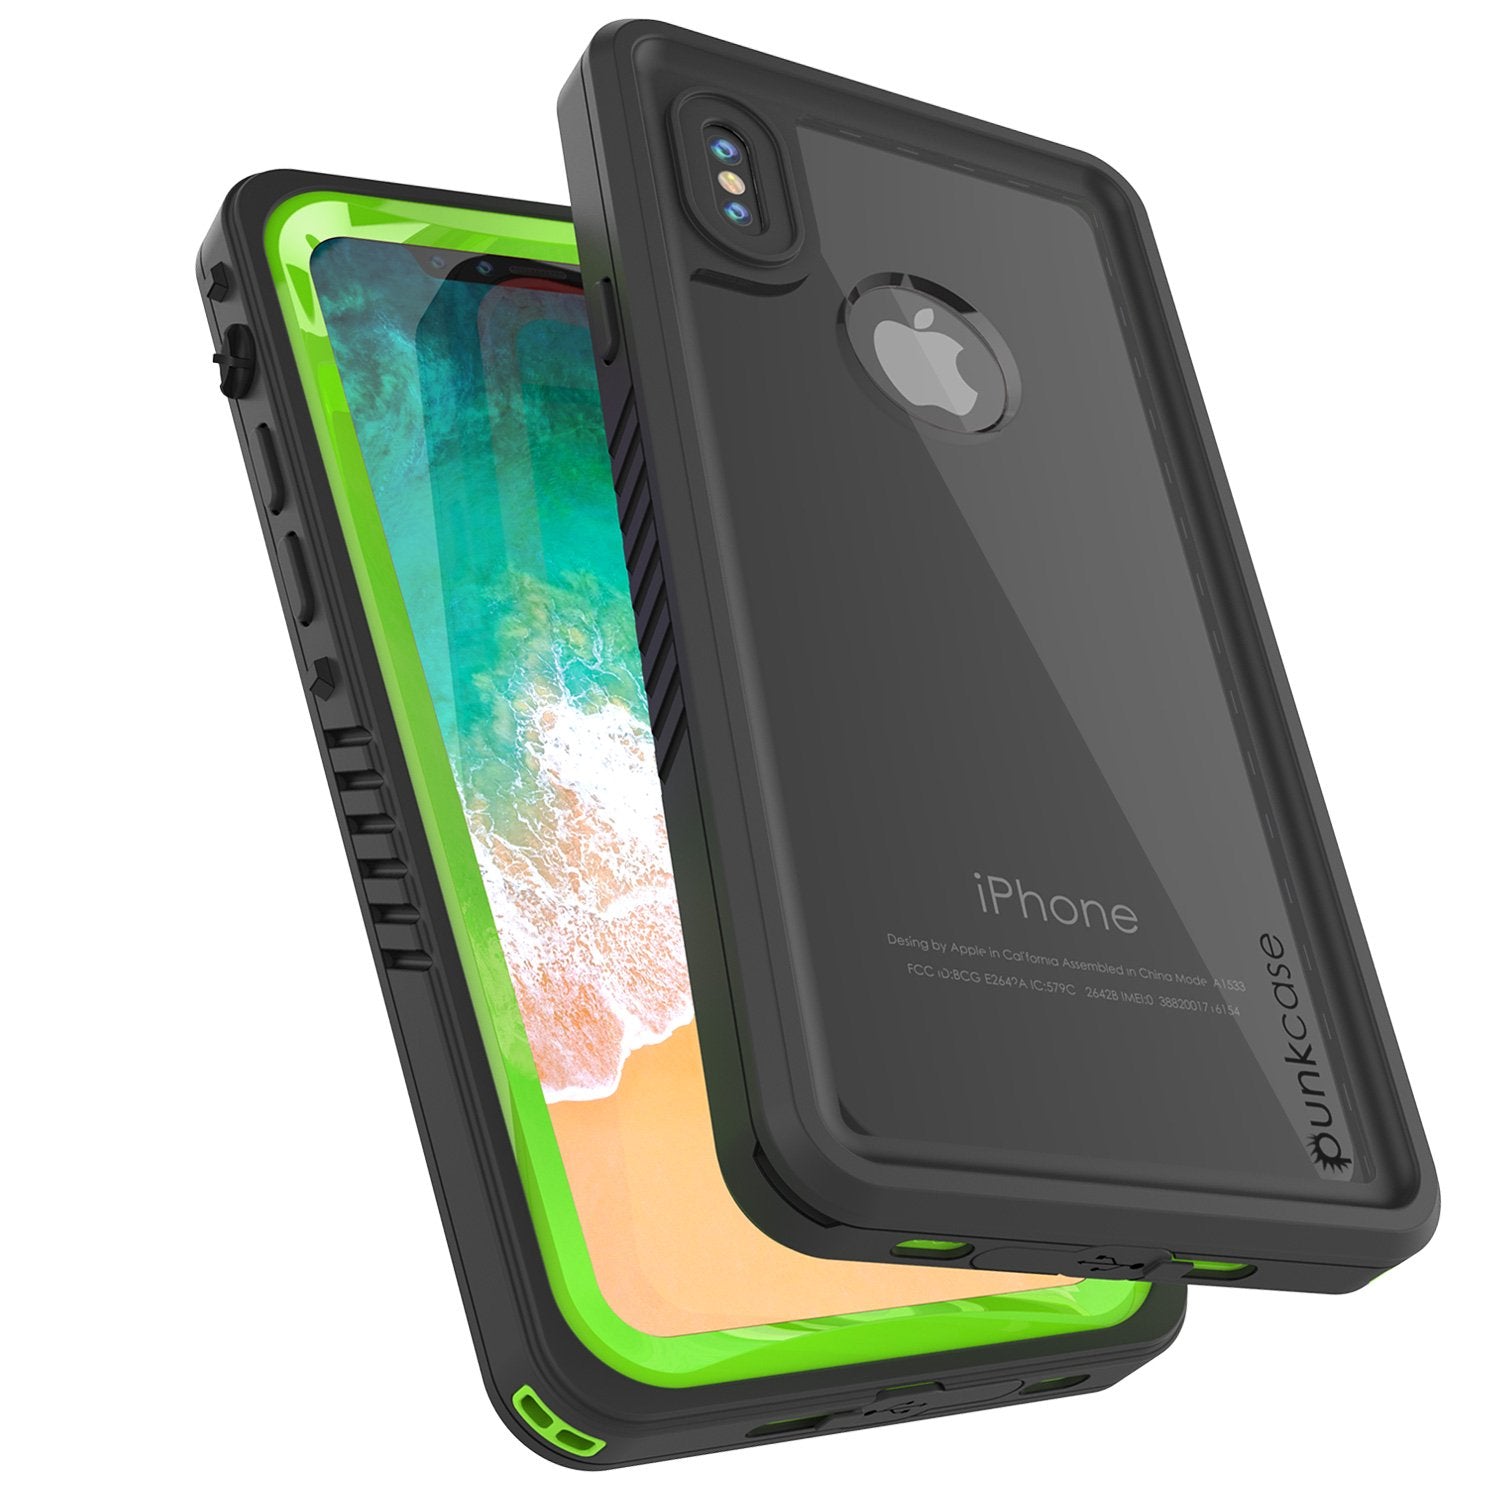 iPhone X Case, Extreme Series Cover W/Screen Protector [Light Green]